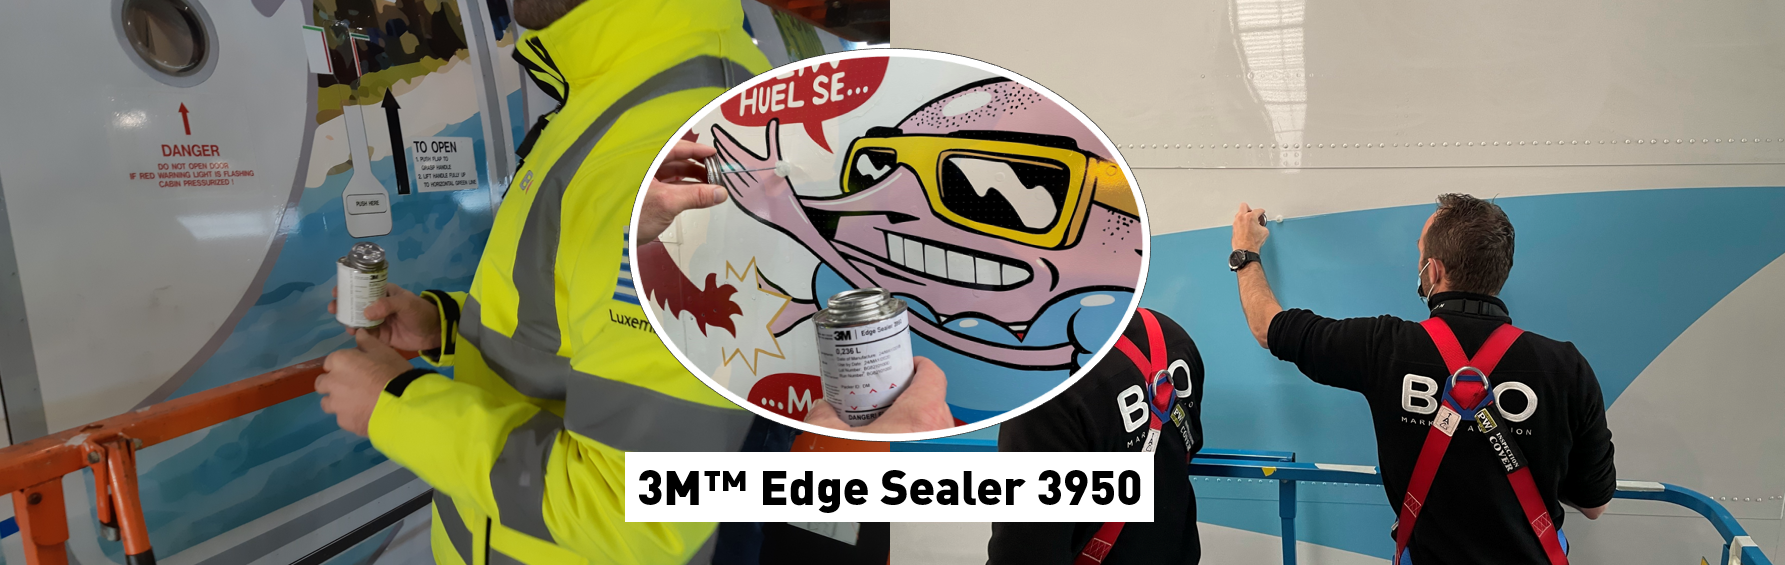 Illustration for: What is 3M™ Edge Sealer 3950 and how are we using it?